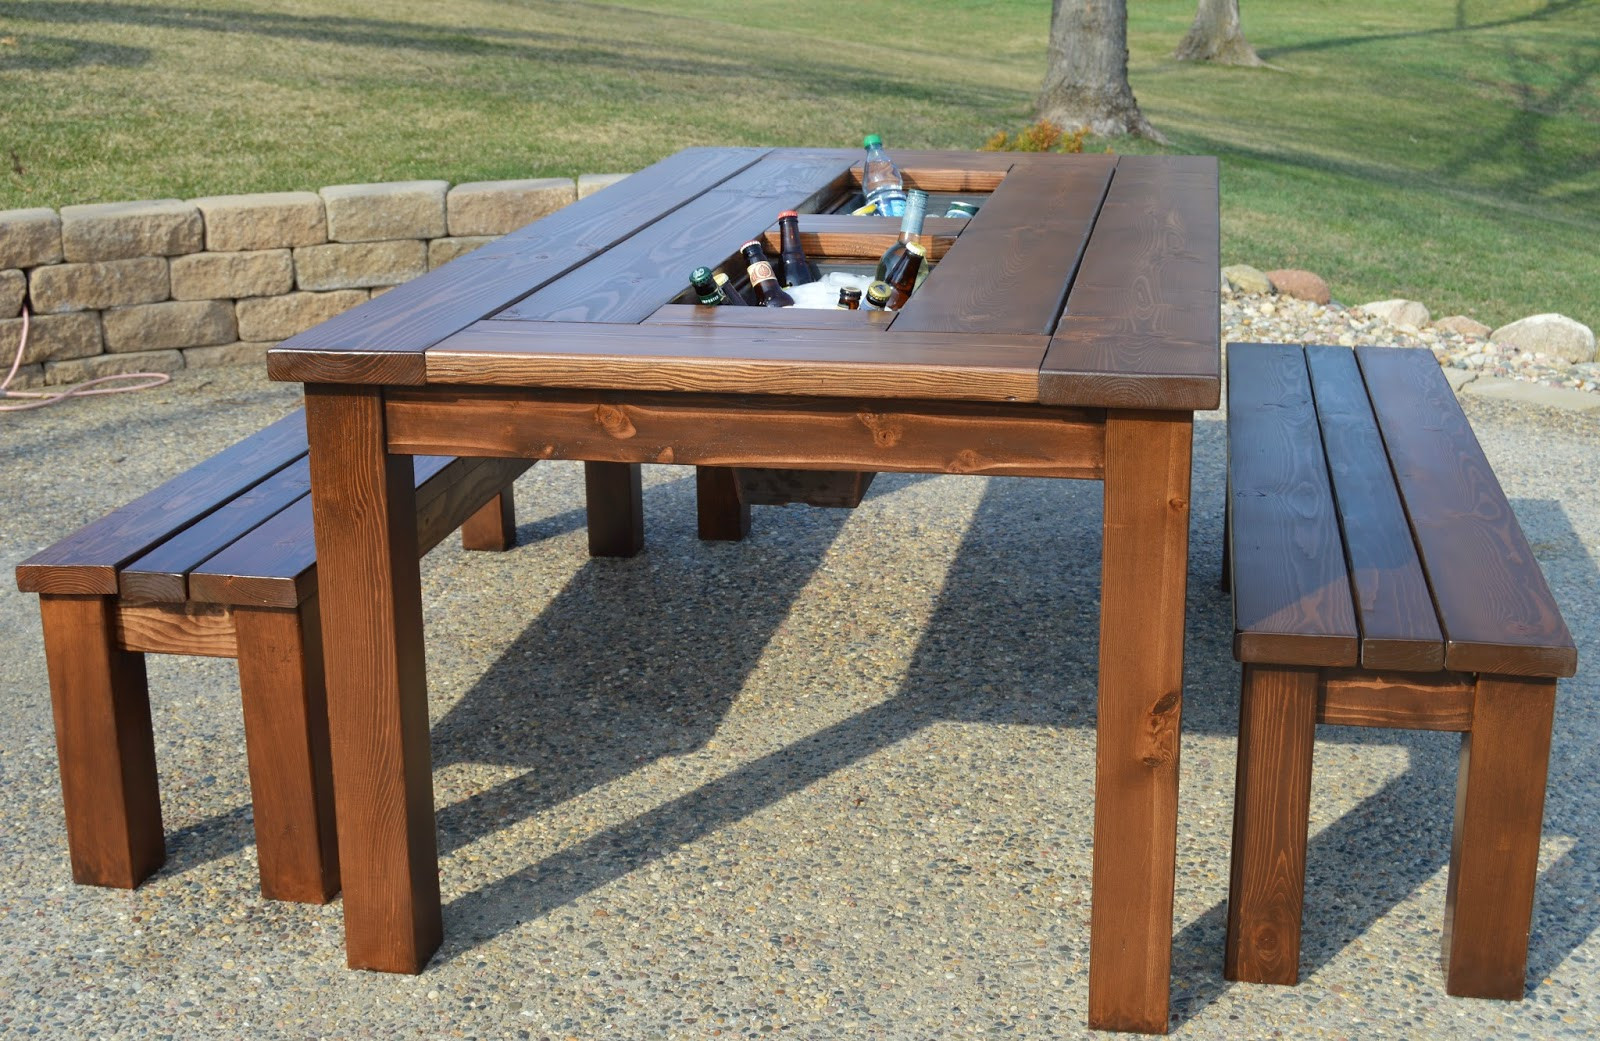 DIY Outdoor Table
 KRUSE S WORKSHOP Patio Party Table with Built In Beer